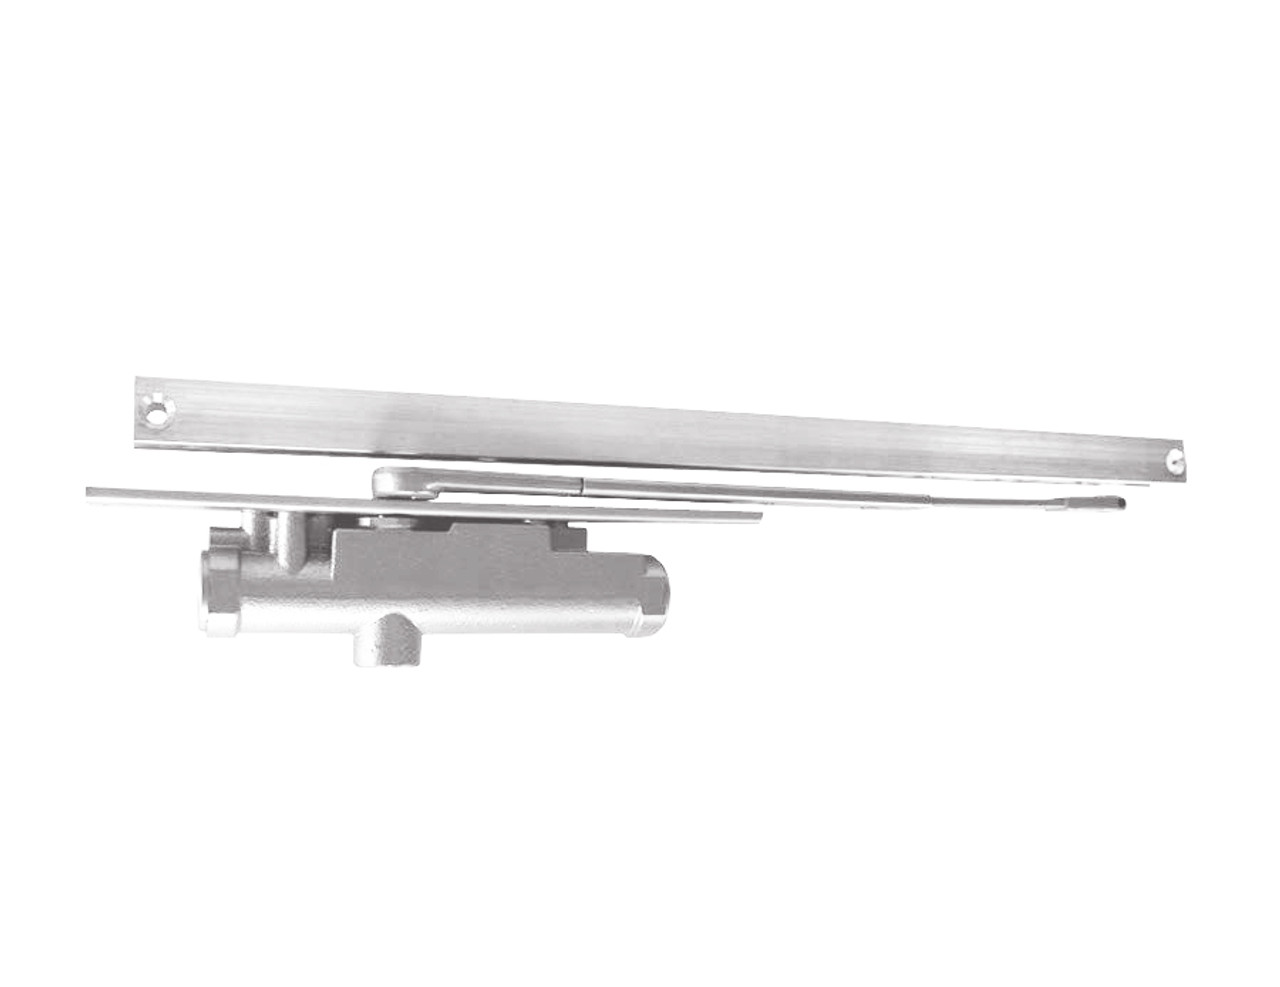 3131-H-Bumper-LH-US26 LCN Door Closer Hold Open Track with Bumper in Bright Chrome Finish